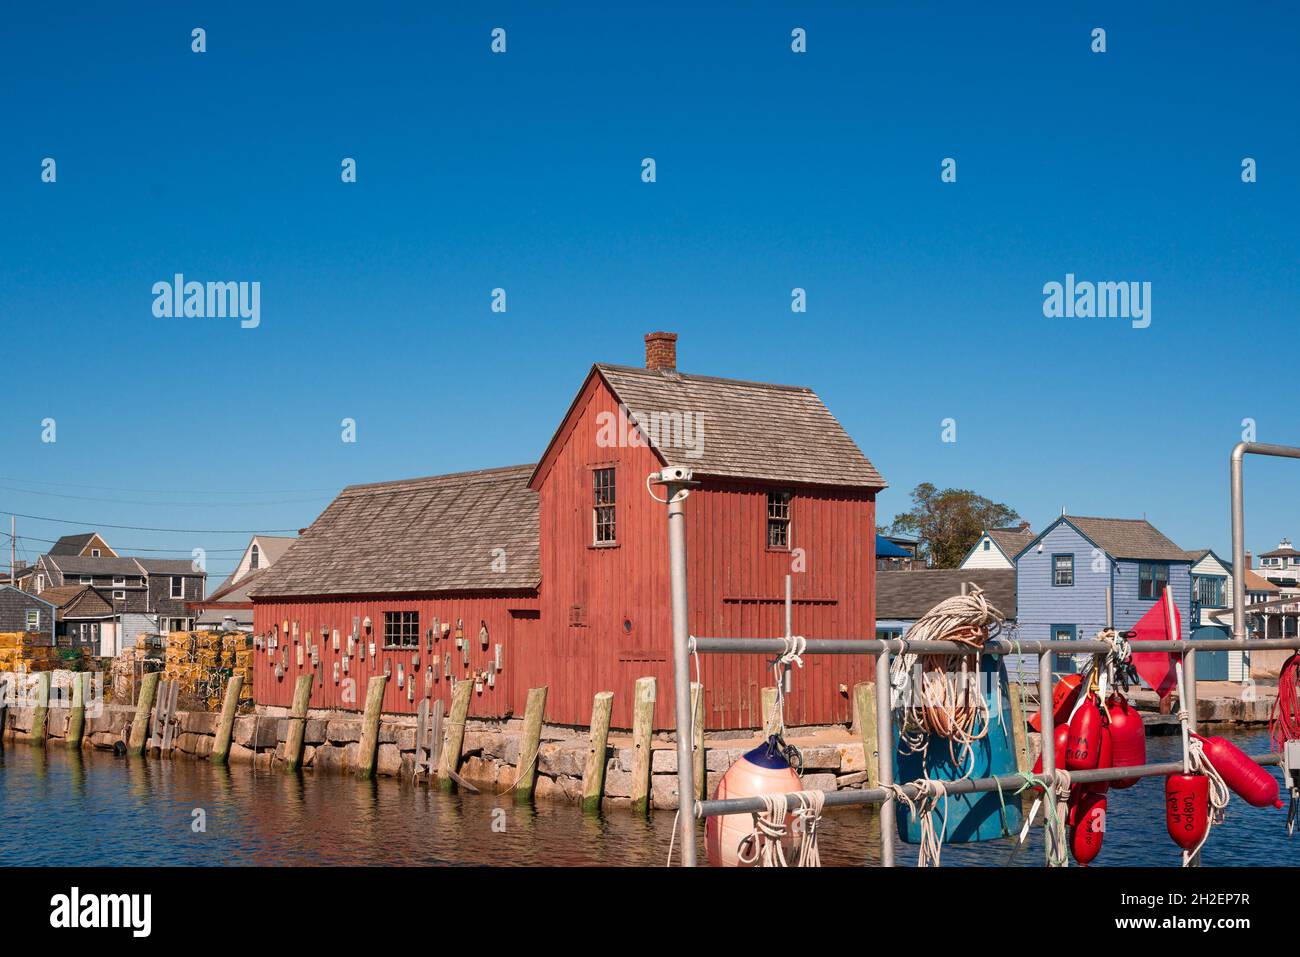 Historic red fishing shack, Motif No. 1, seen from New England Coastal Village of Rockport Massachusetts seen on a sunny day Stock Photo